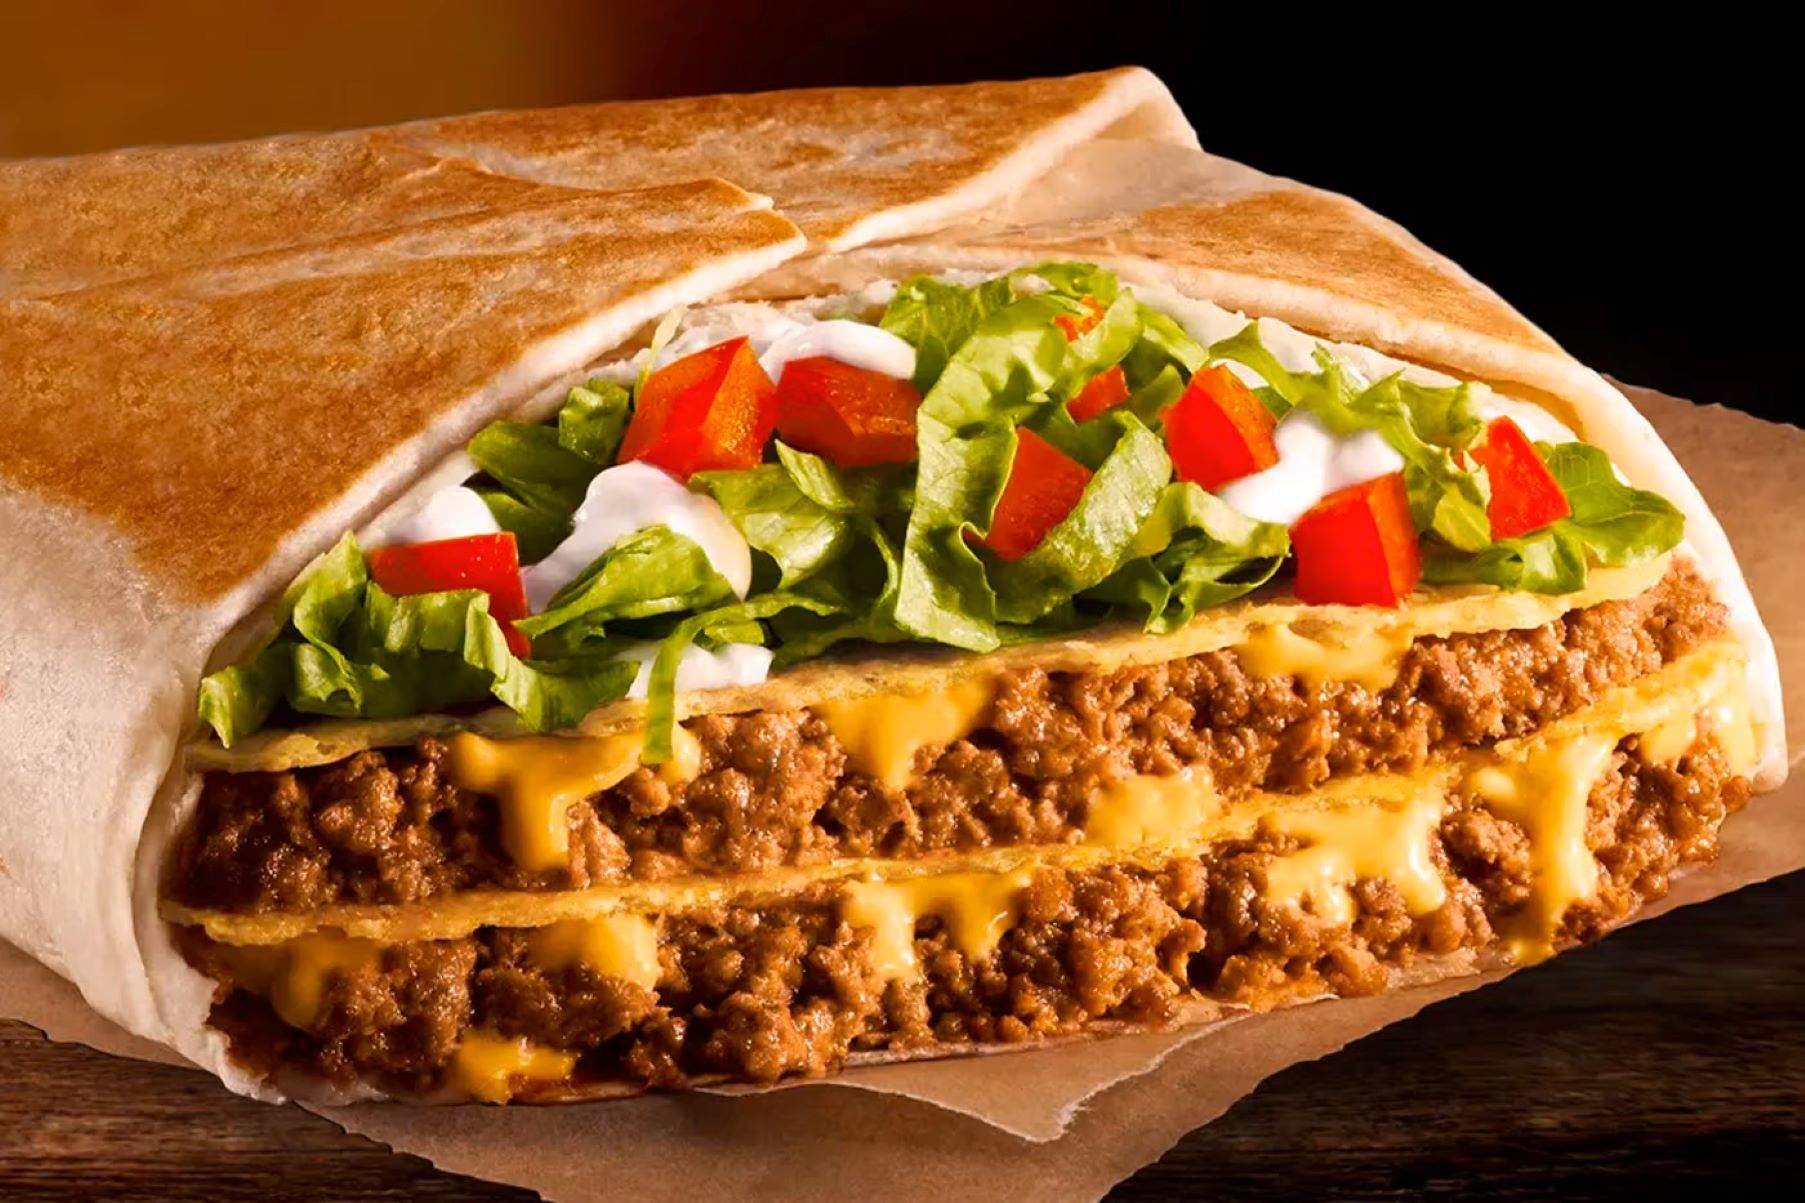 https://facts.net/wp-content/uploads/2023/11/19-taco-bell-triple-double-crunchwrap-box-nutrition-facts-1701008226.jpg